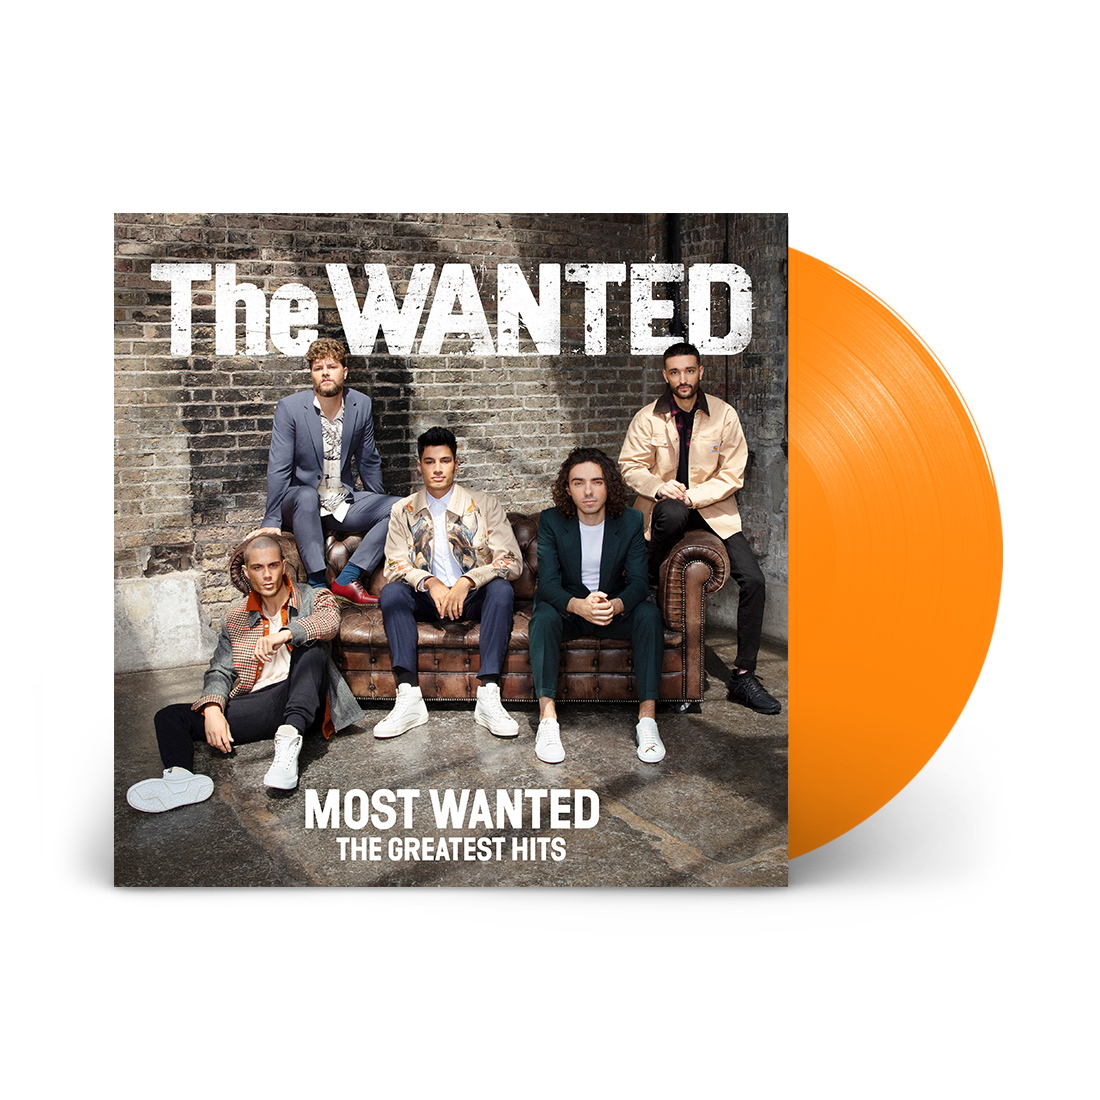 The Wanted - Most Wanted - The Greatest Hits: Orange Vinyl LP